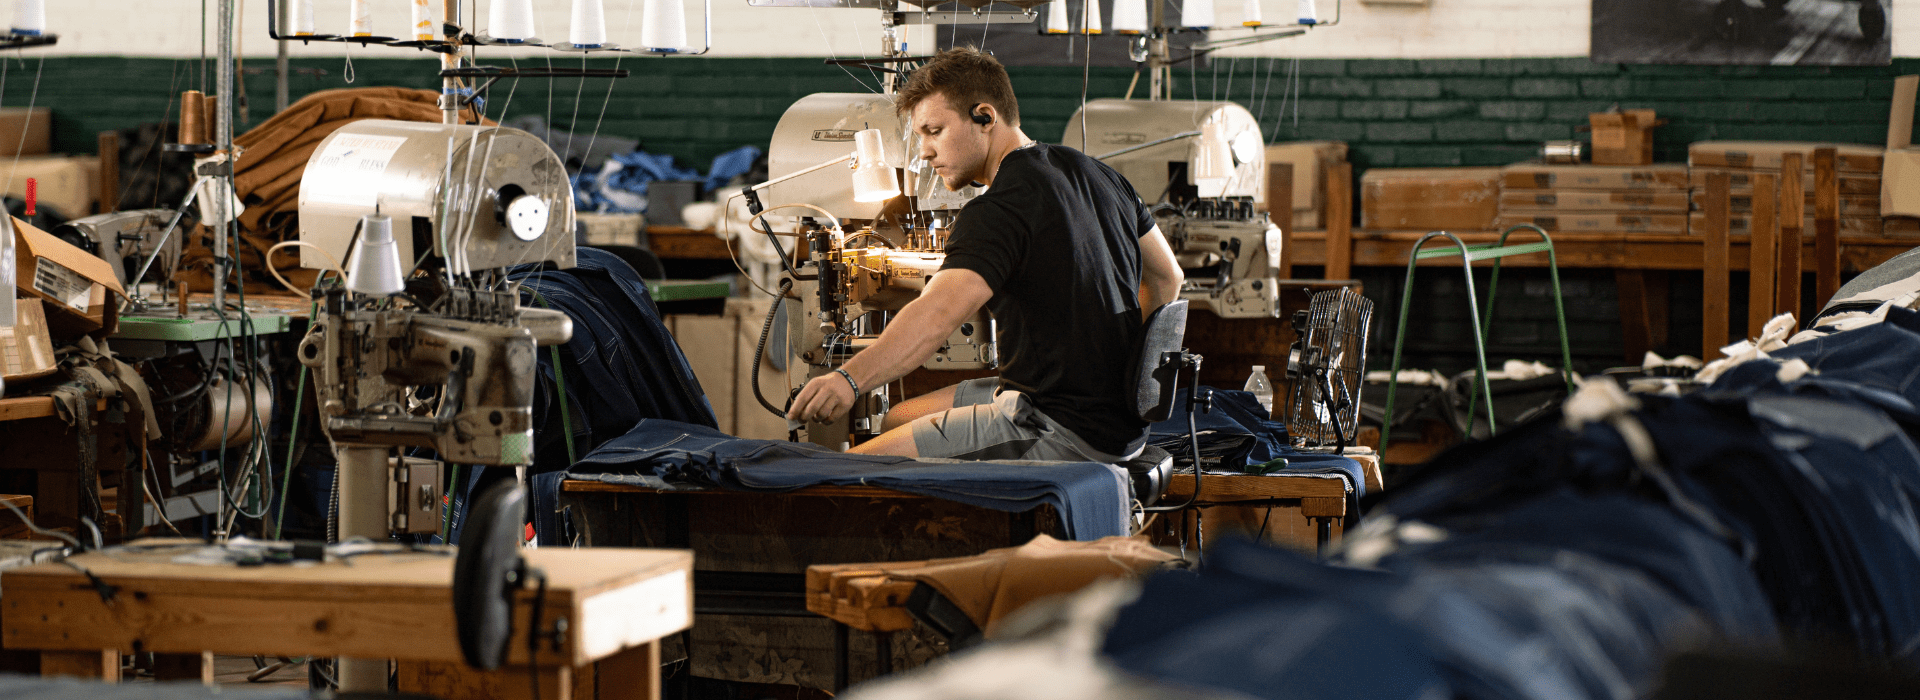 Made In Bristol: The L.C. King Manufacturing Co. Story - Discover Bristol